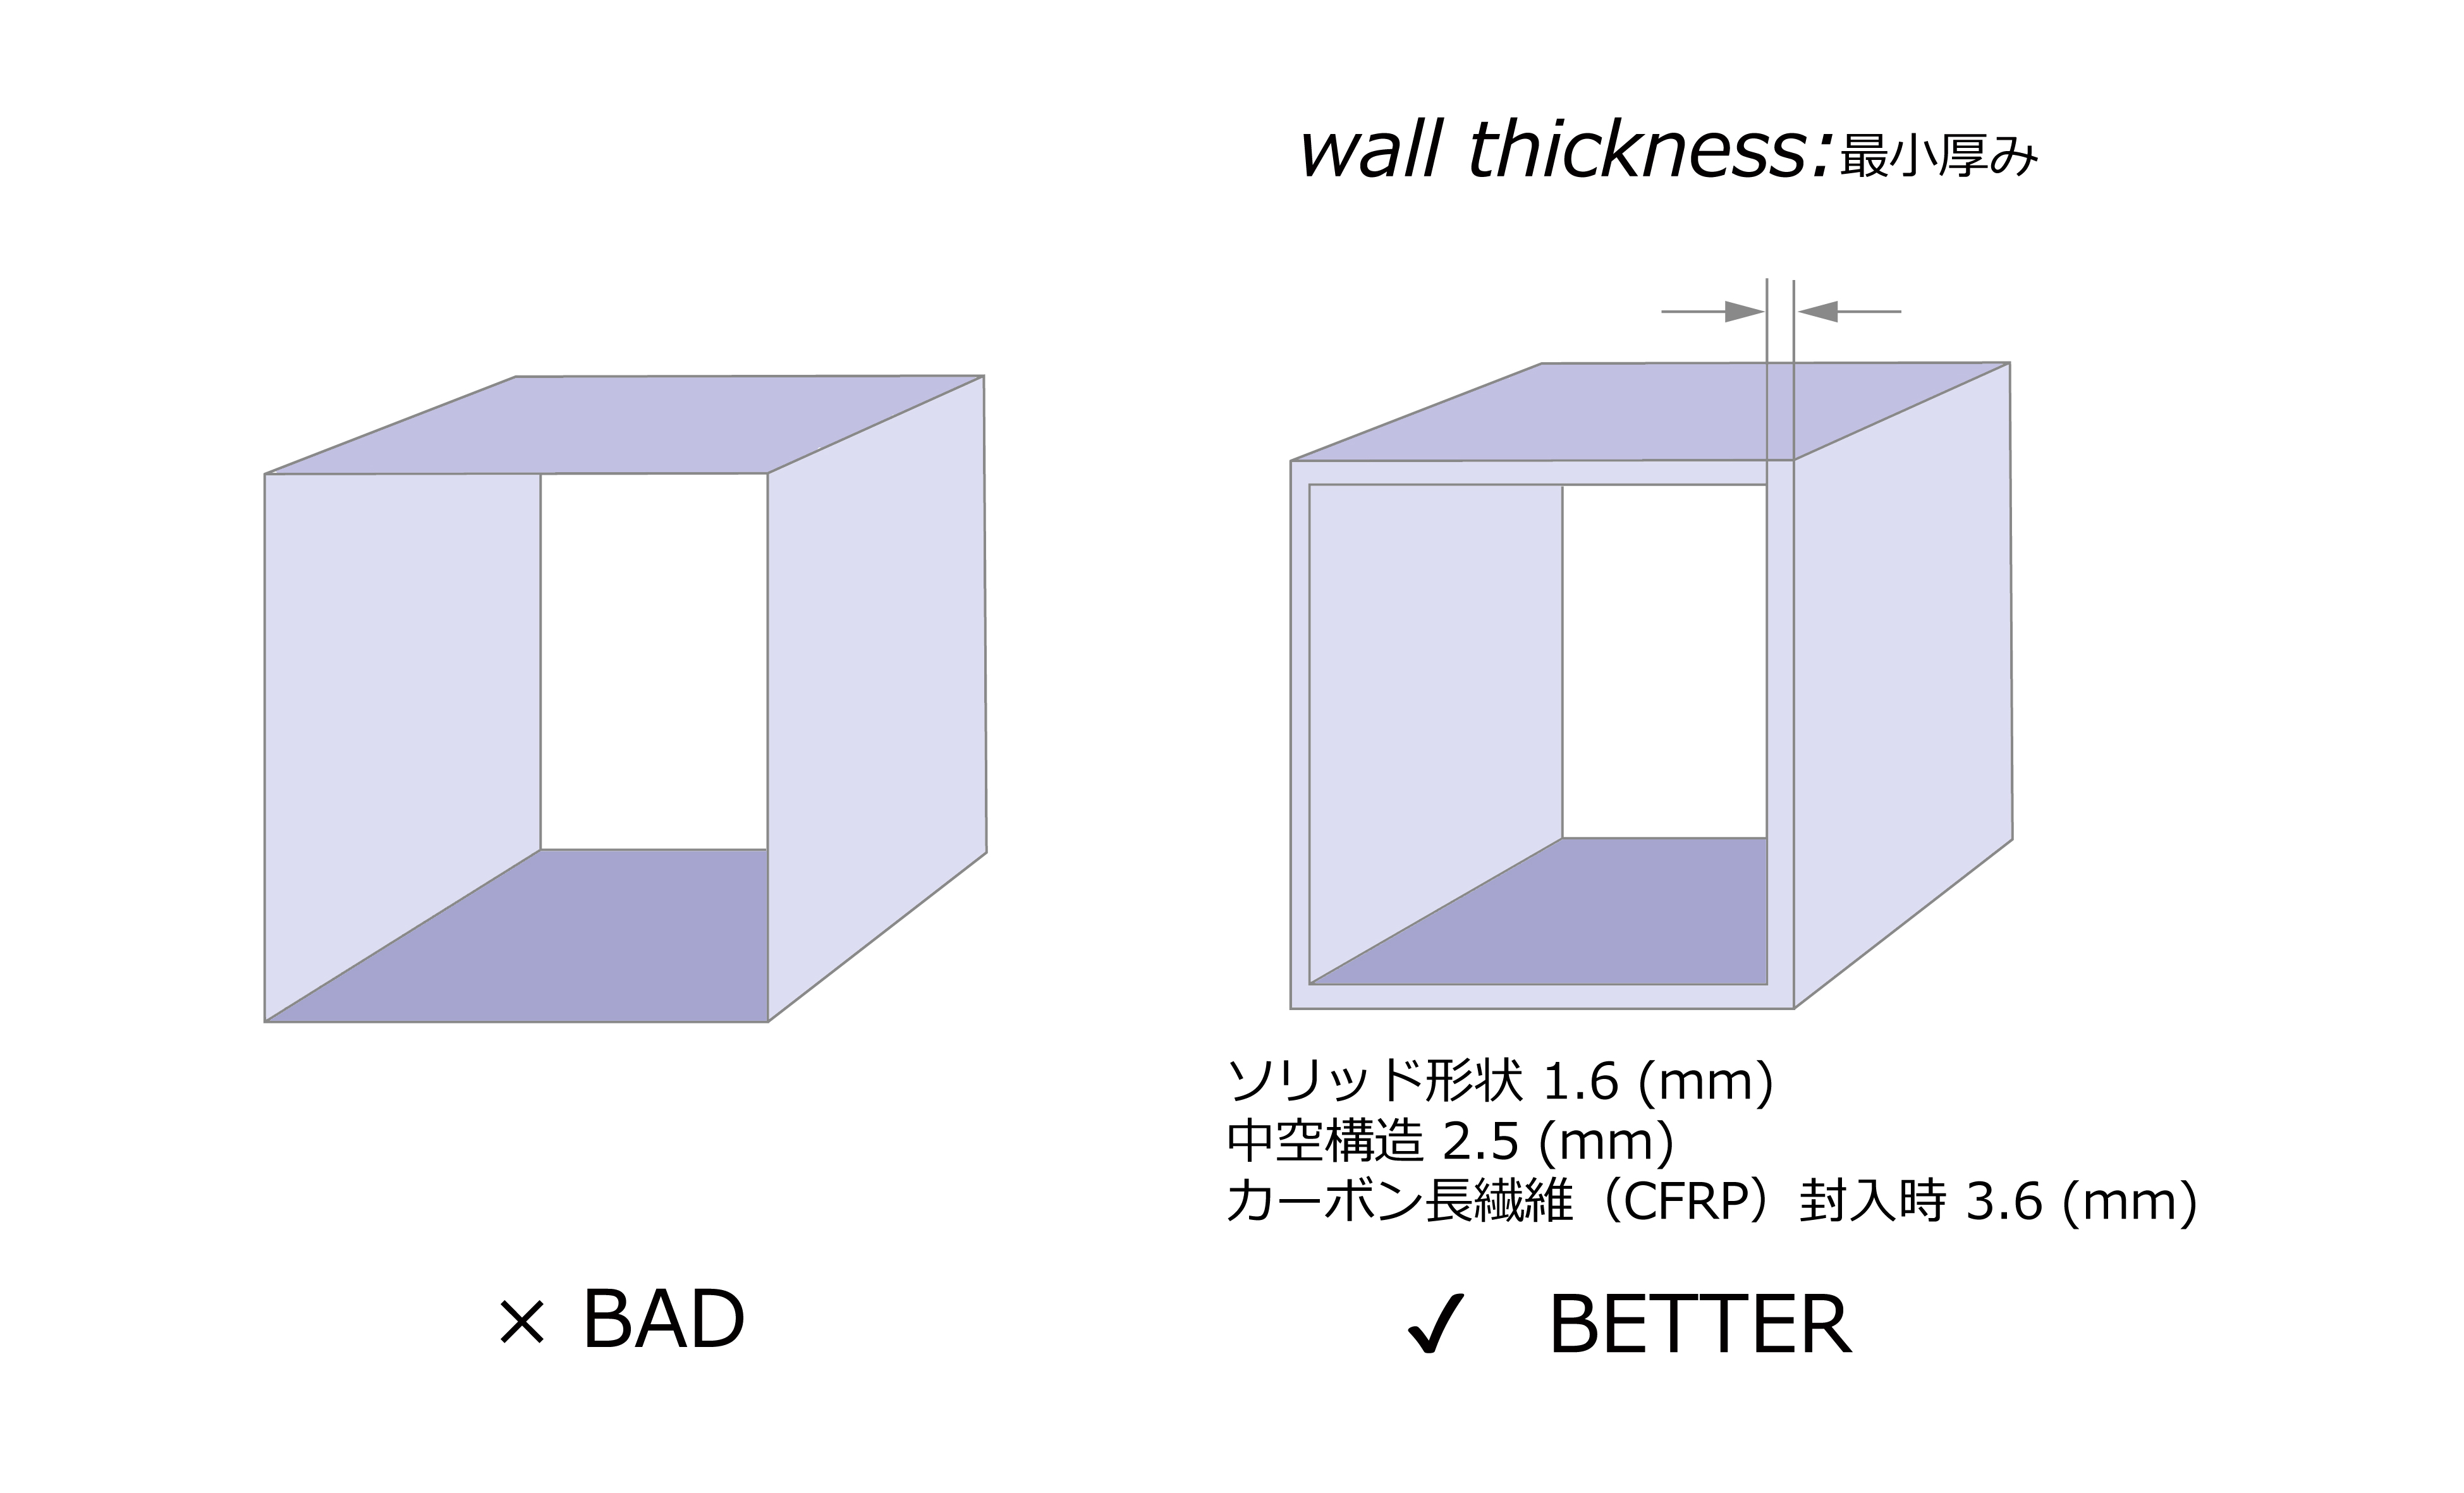 Stainless wall thickness